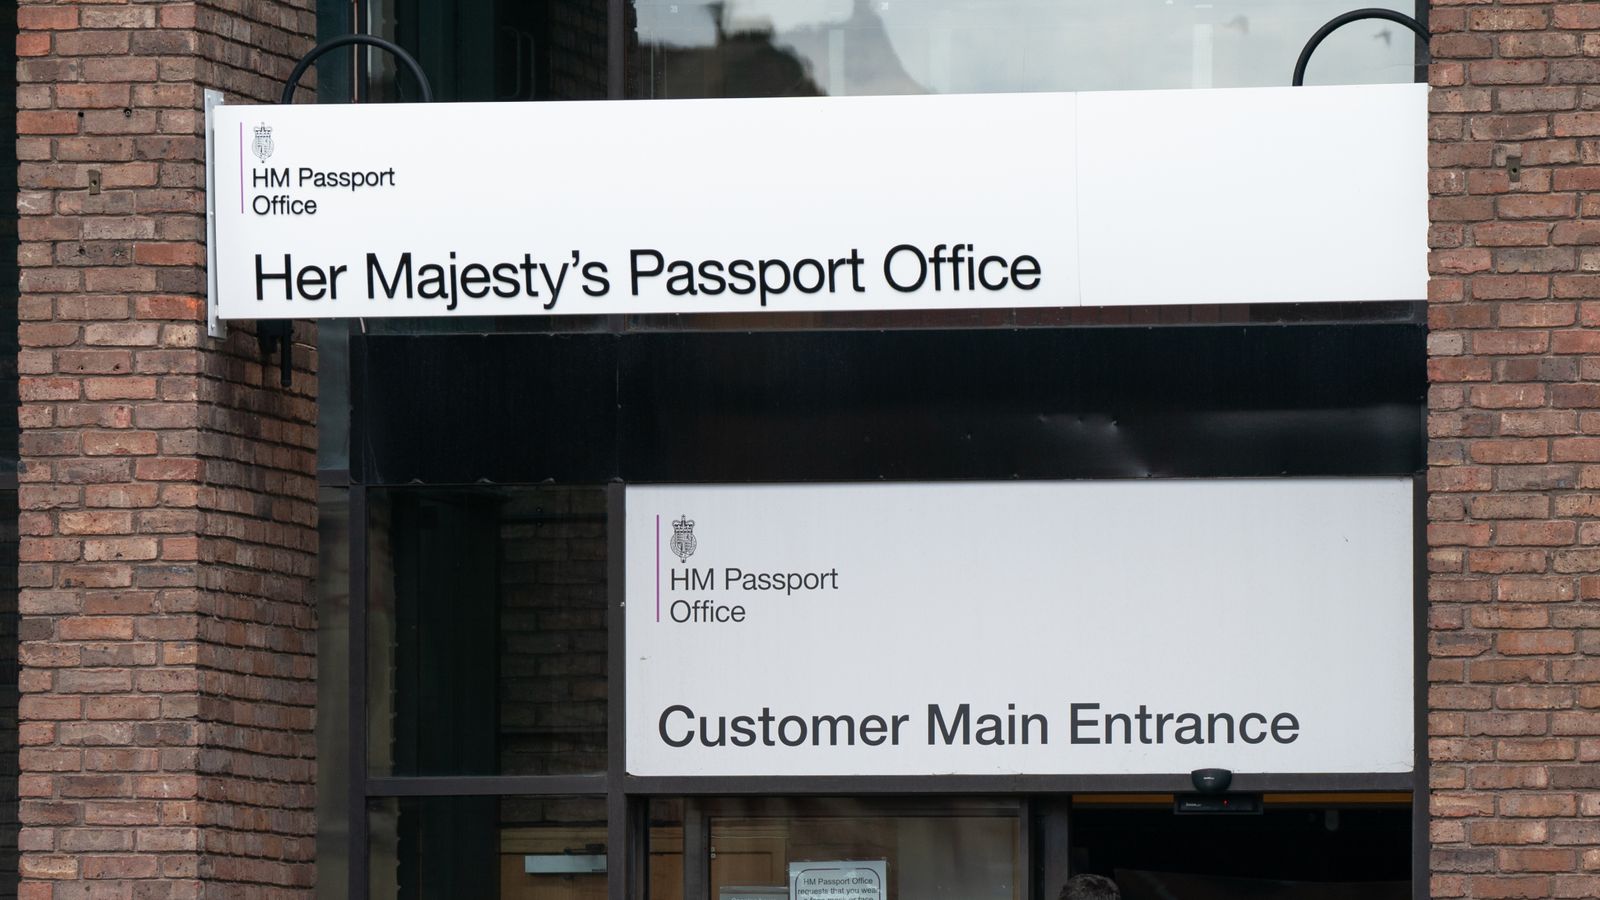 Passport Office workers strike: Five-week walkout begins today in row over pay and pensions